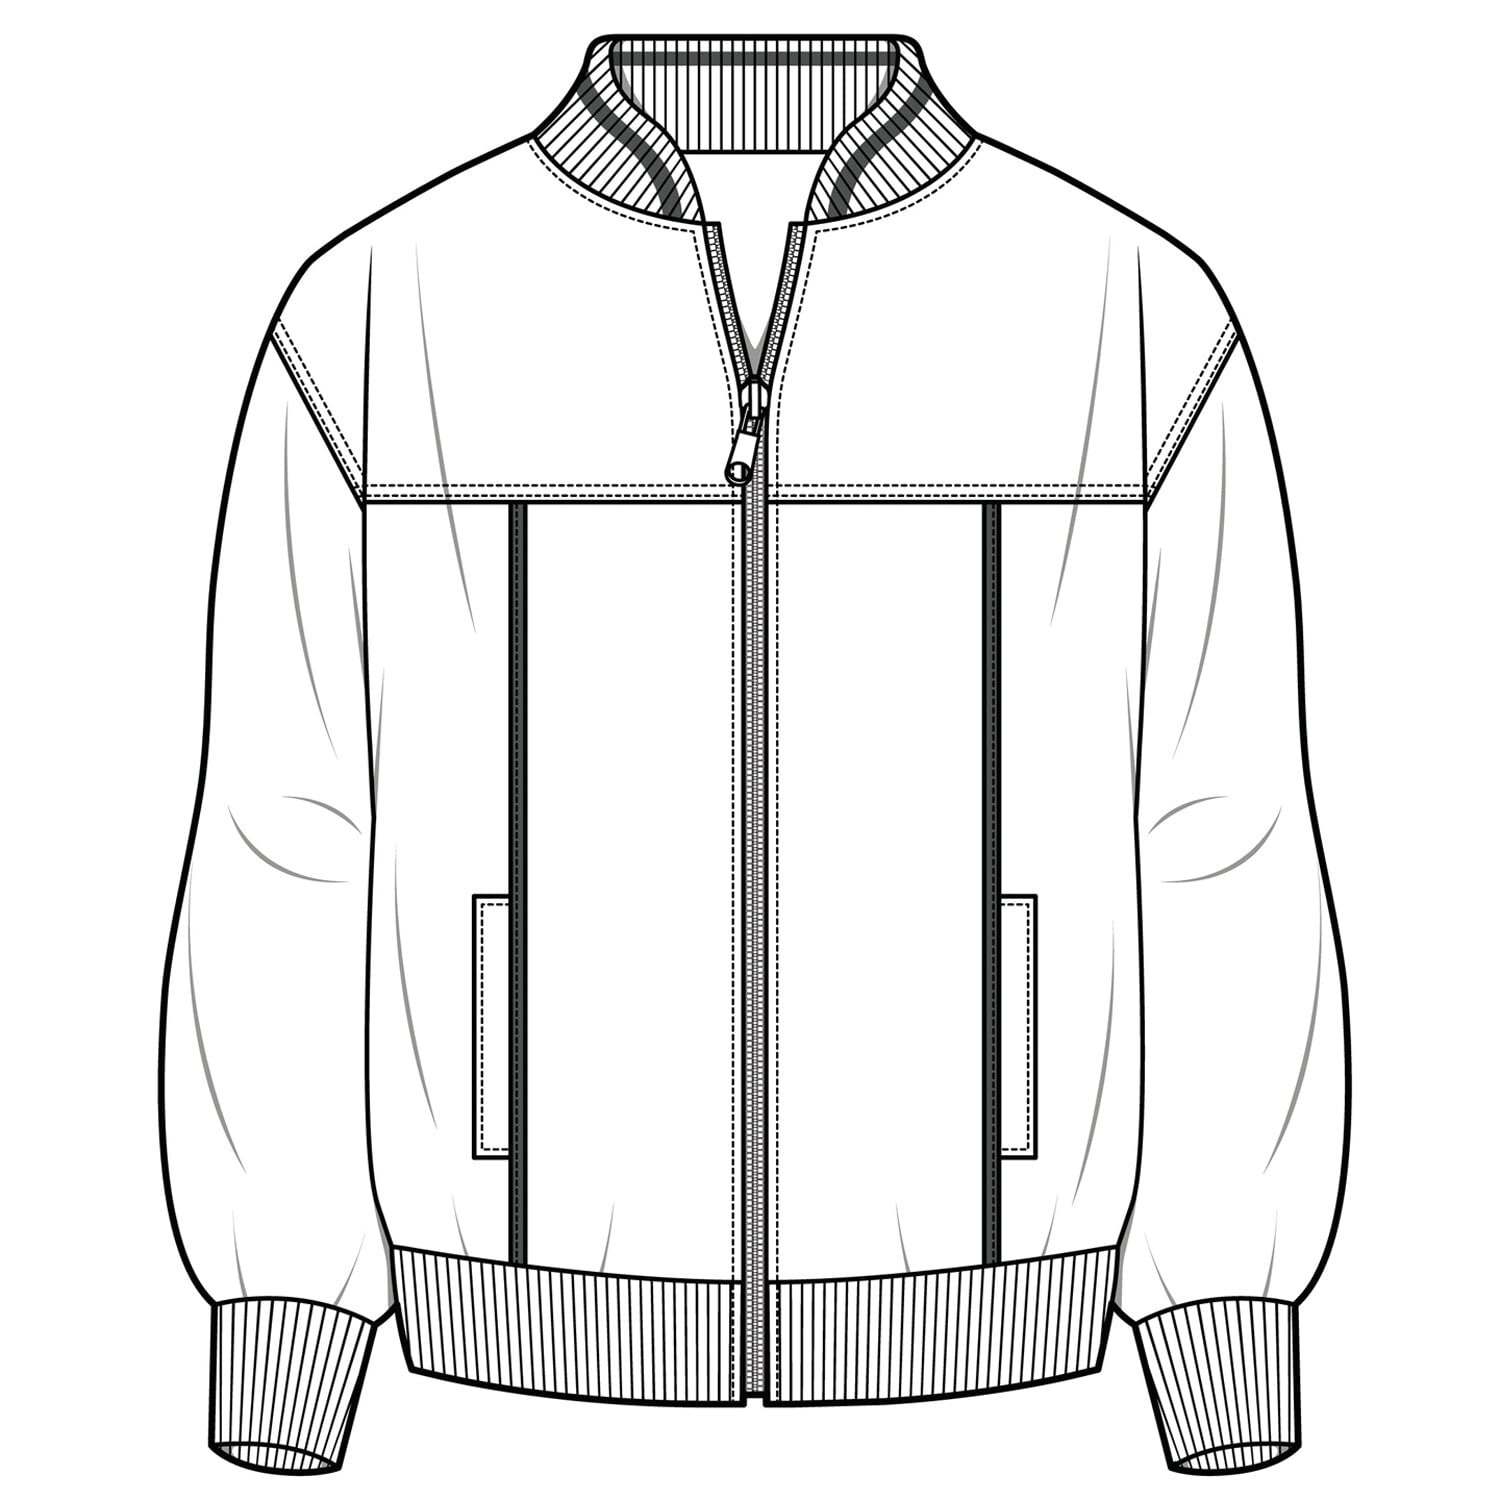 Custom Jackets - Design Your Own at The Jacket Maker